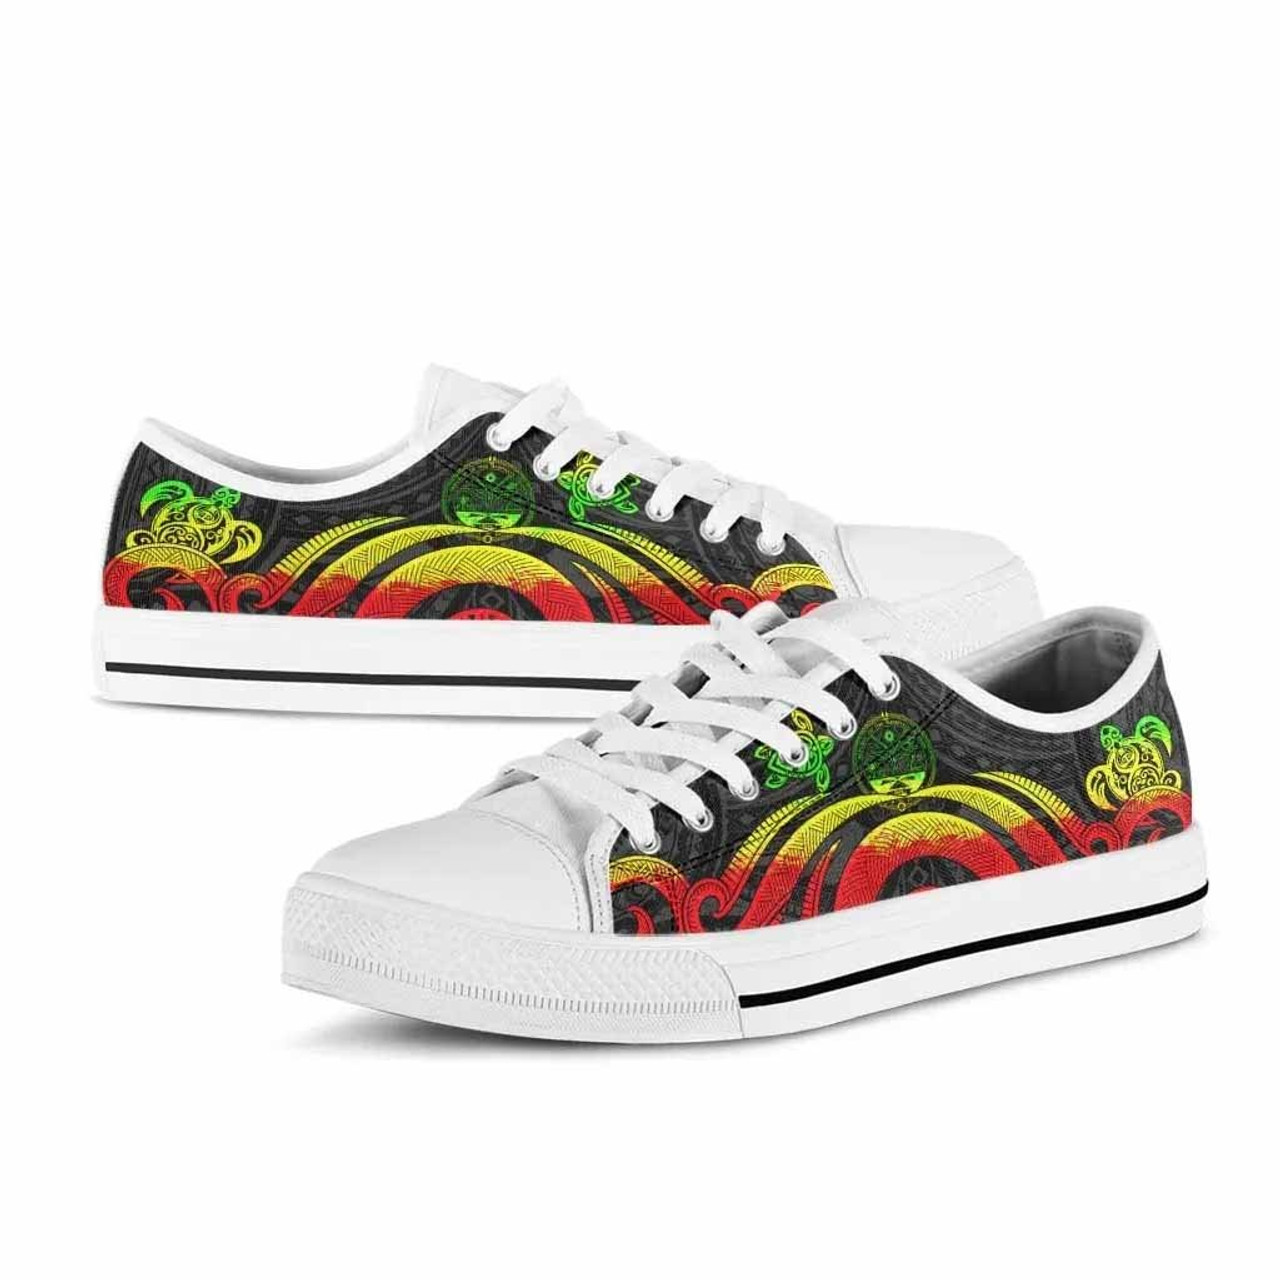 Marshall Islands Low Top Canvas Shoes - Reggae Tentacle Turtle Crest 8